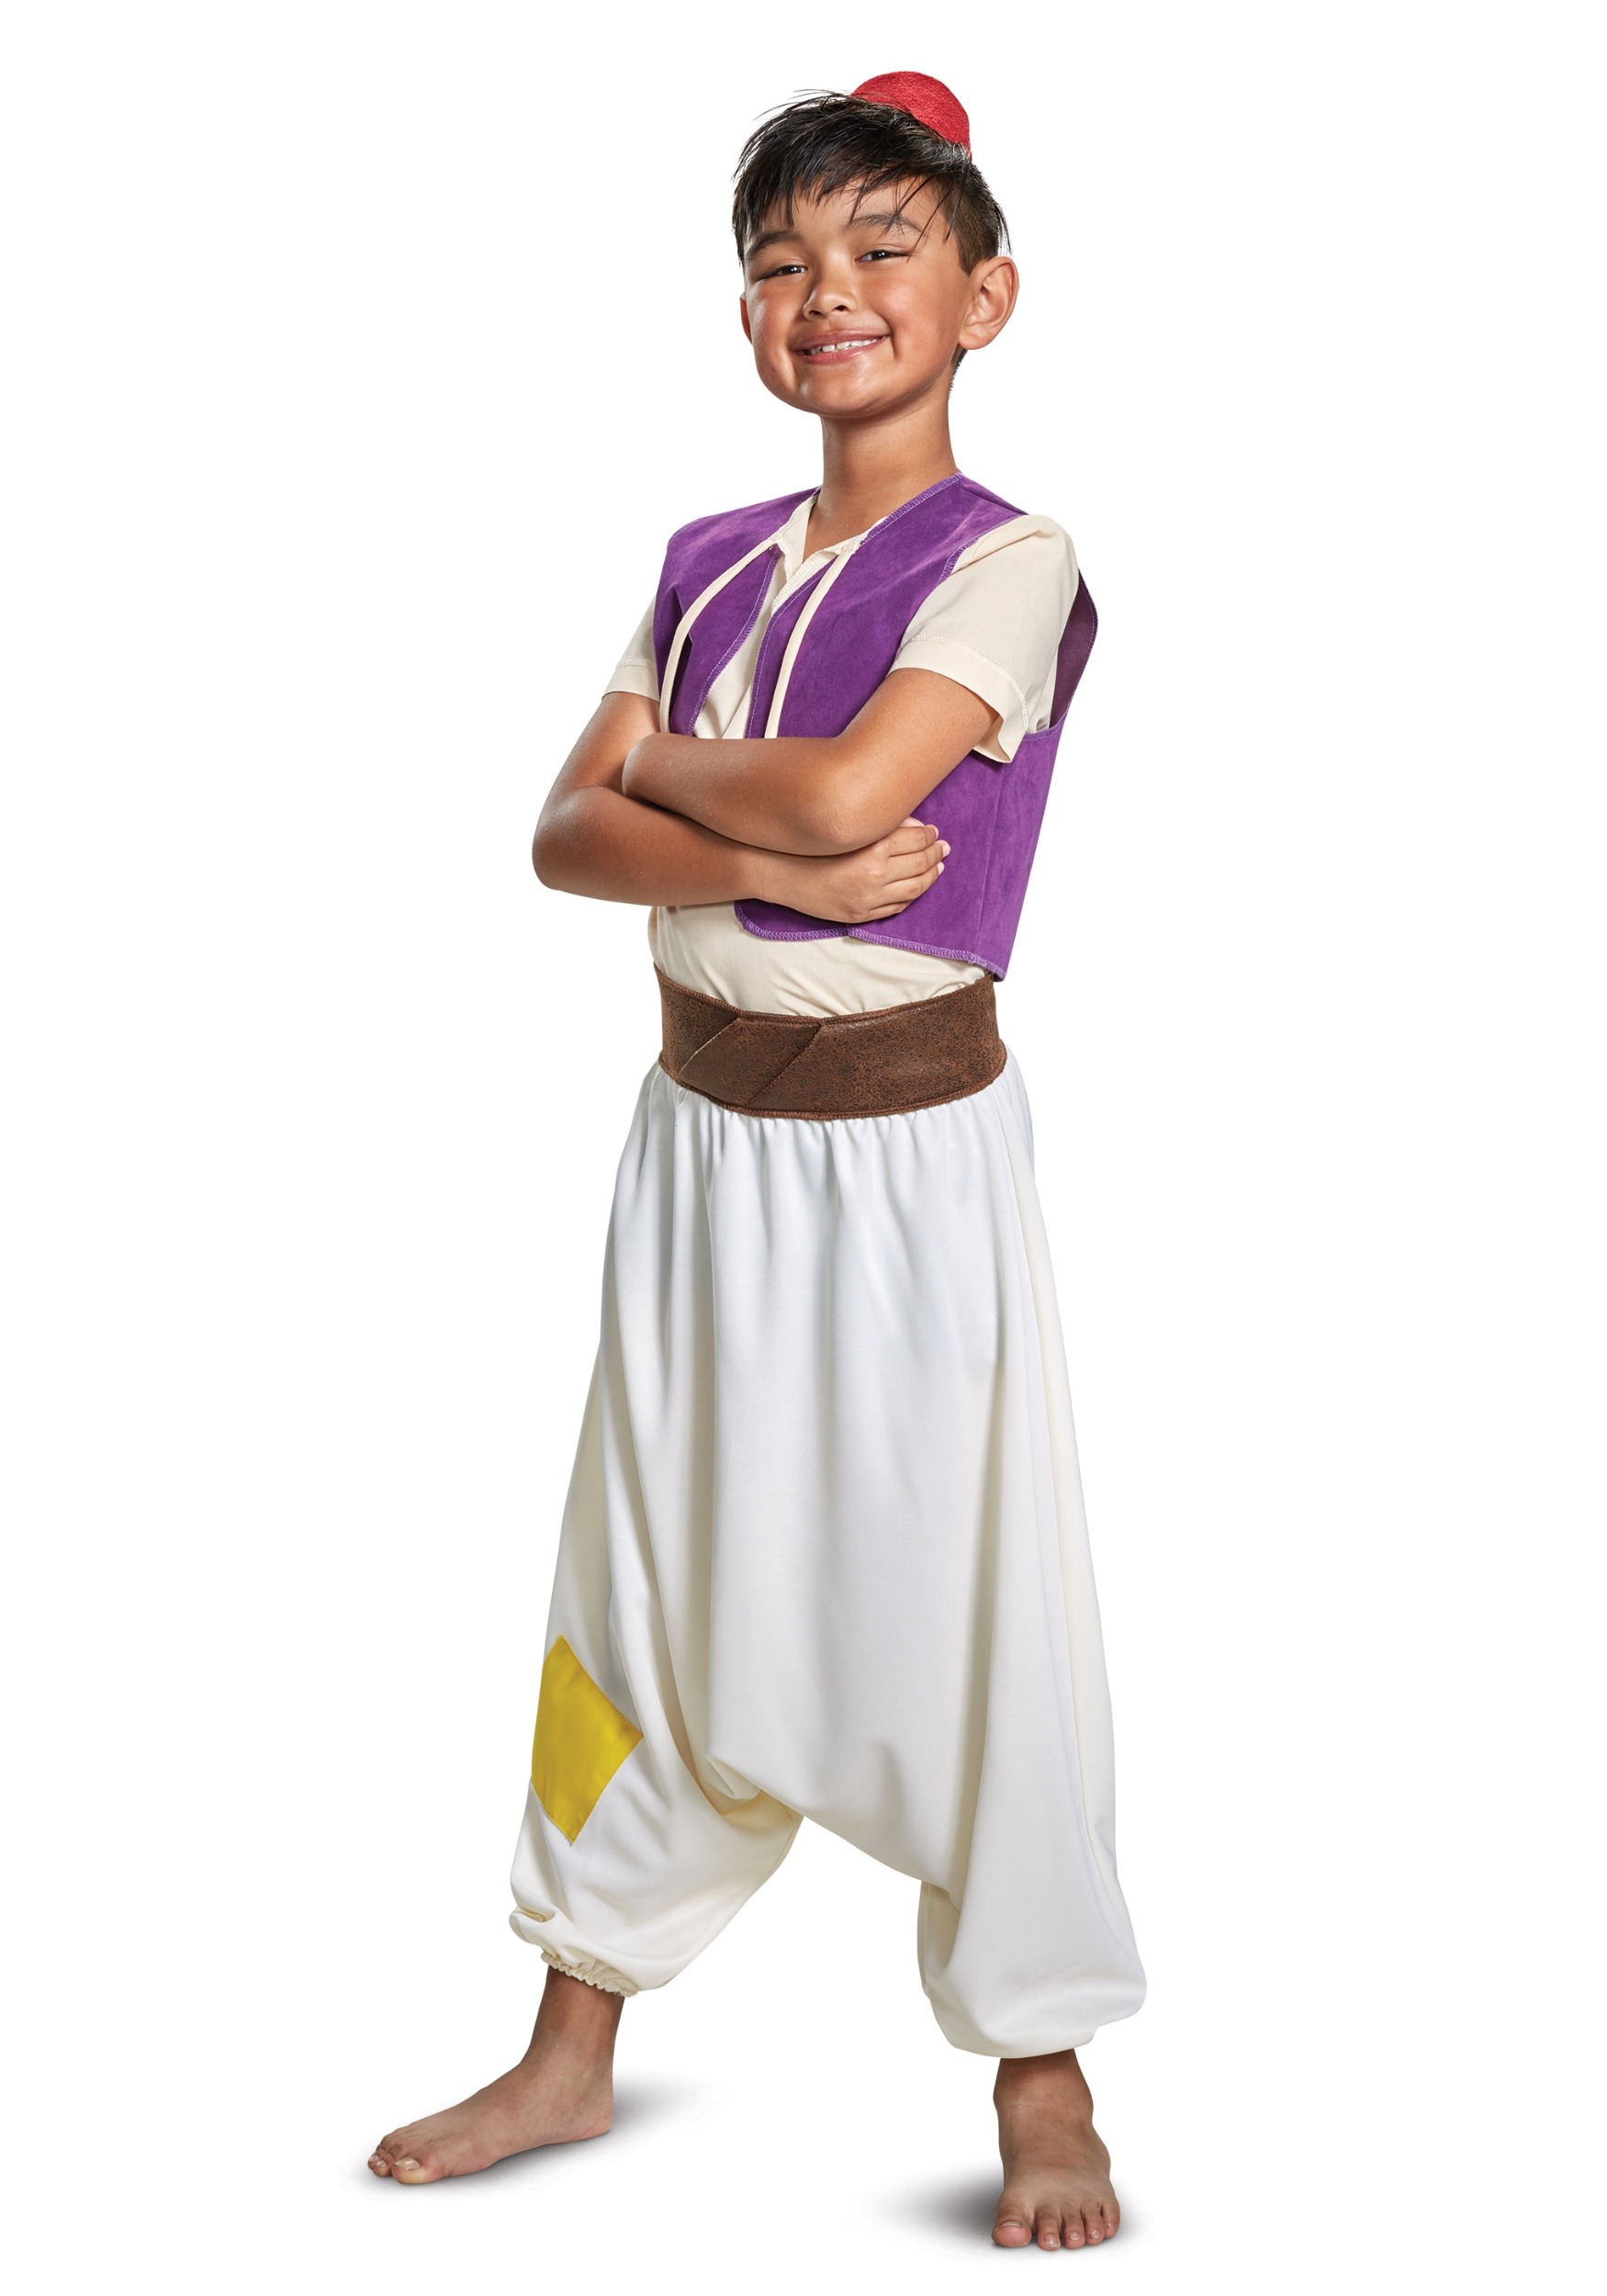 Aladdin Street Rat Costume For A Child W/ Pants & Shirt , Exclusive